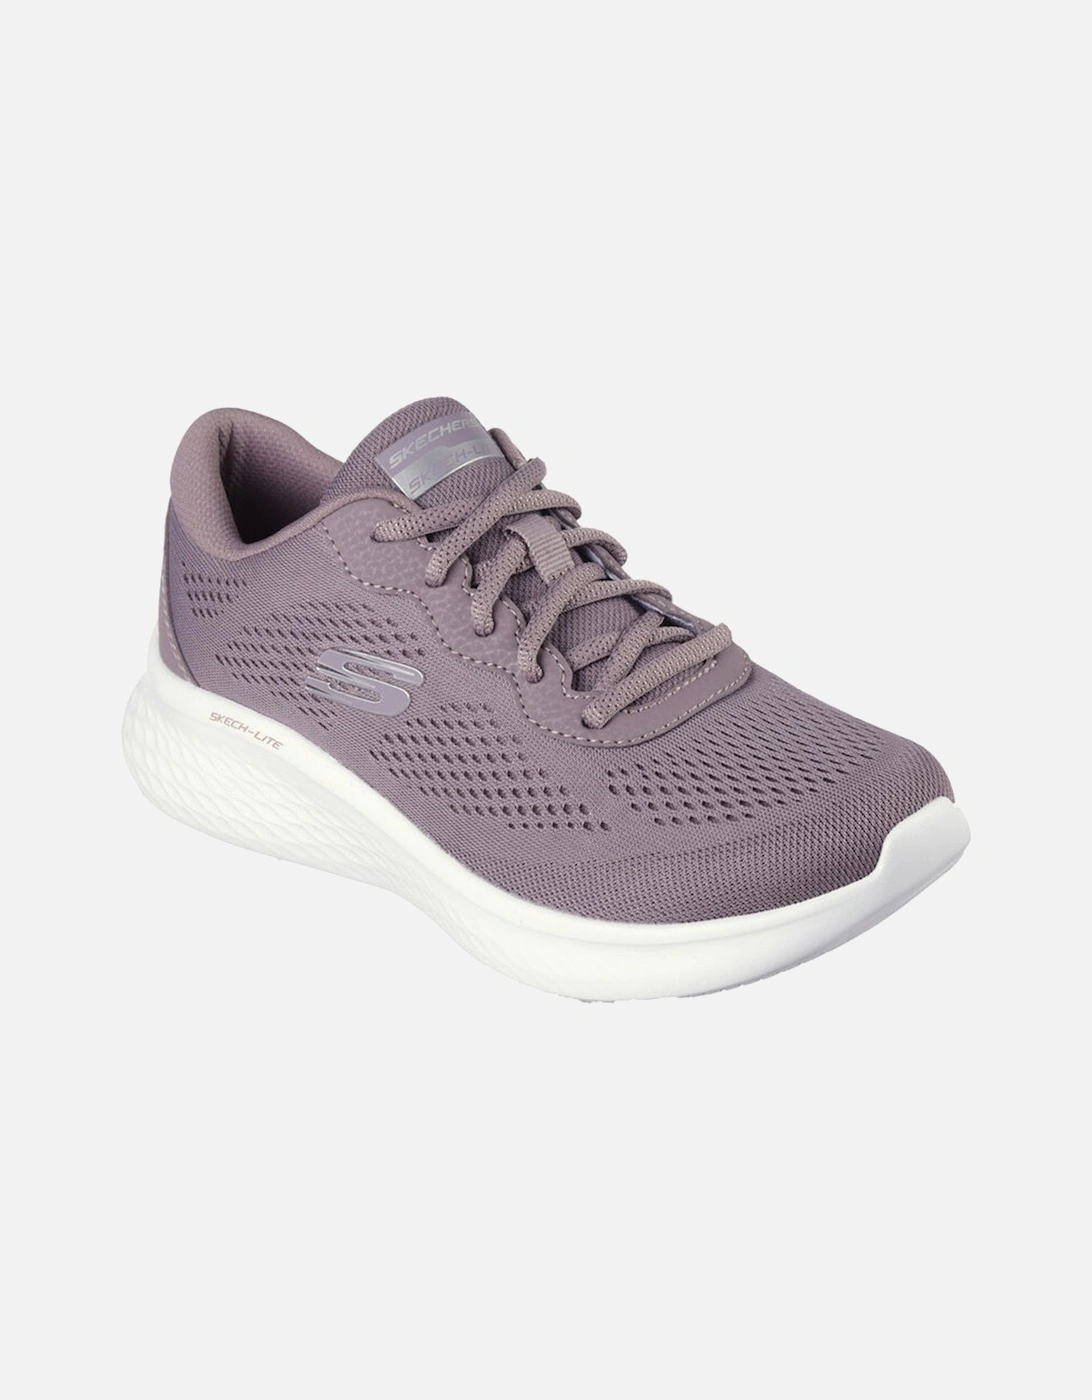 Skech-Lite Pro Perforated SS23